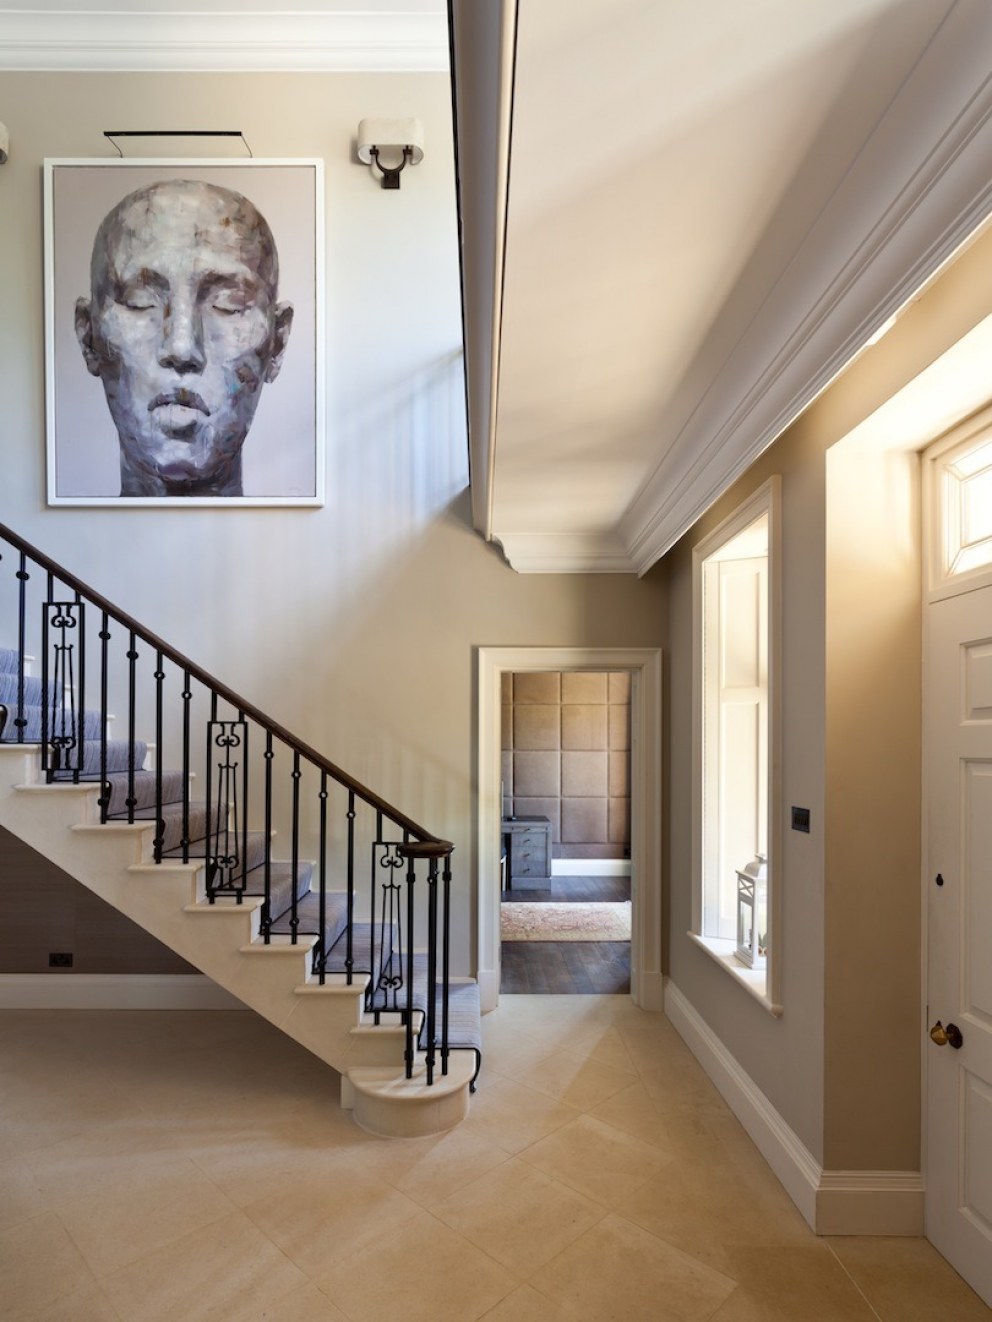 Oxfordshire country house | Hall and staircase | Interior Designers